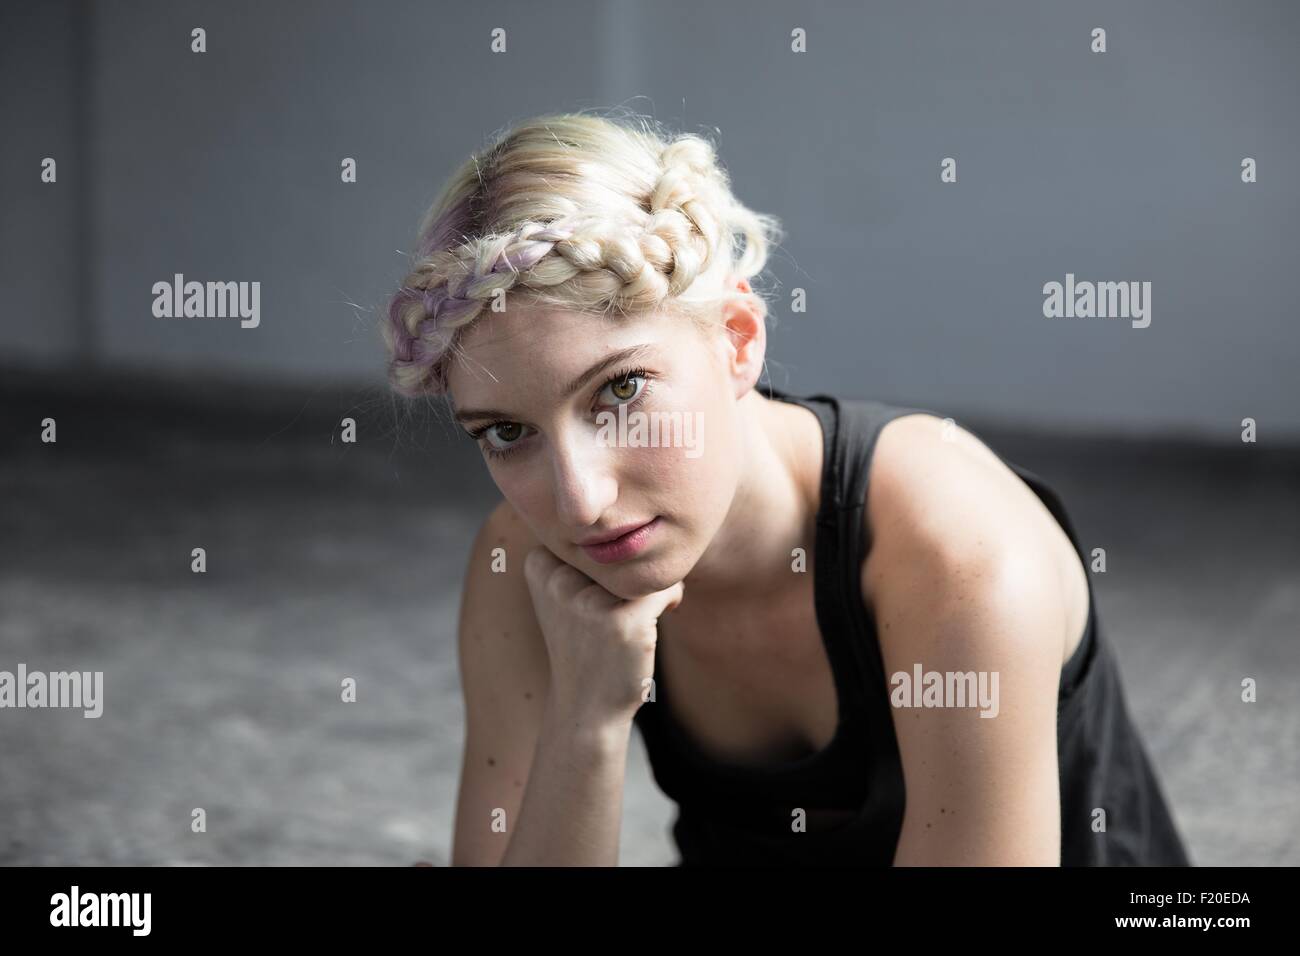 Portrait of young woman with braided hair Stock Photo